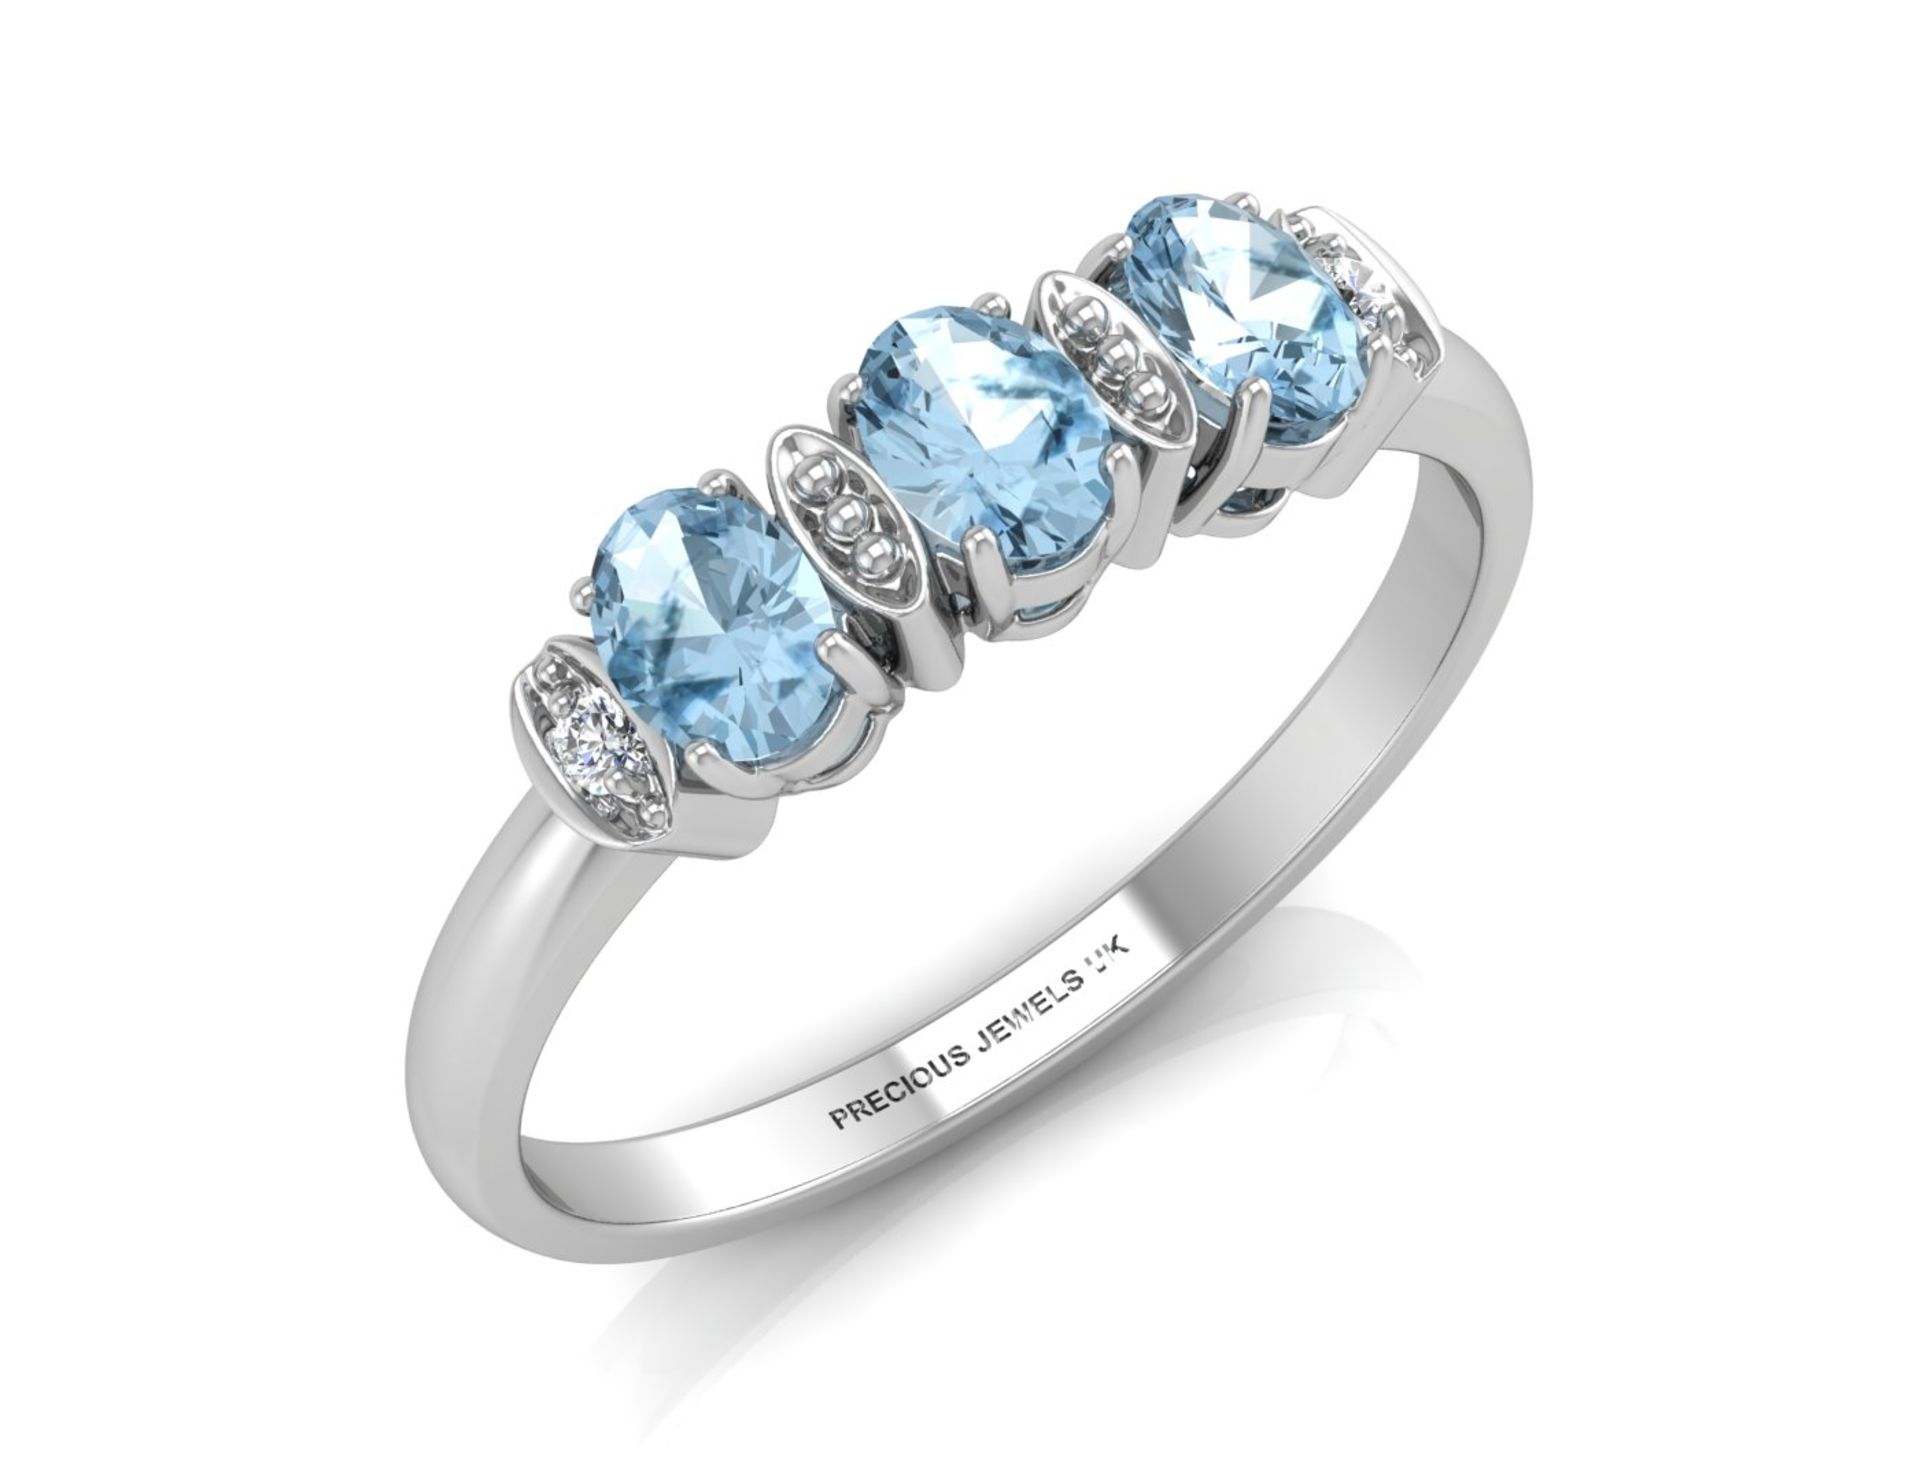 9ct White Gold Semi Eternity Diamond and Blue Topaz Ring (BT0.63) 0.01 Carats - Image 3 of 5